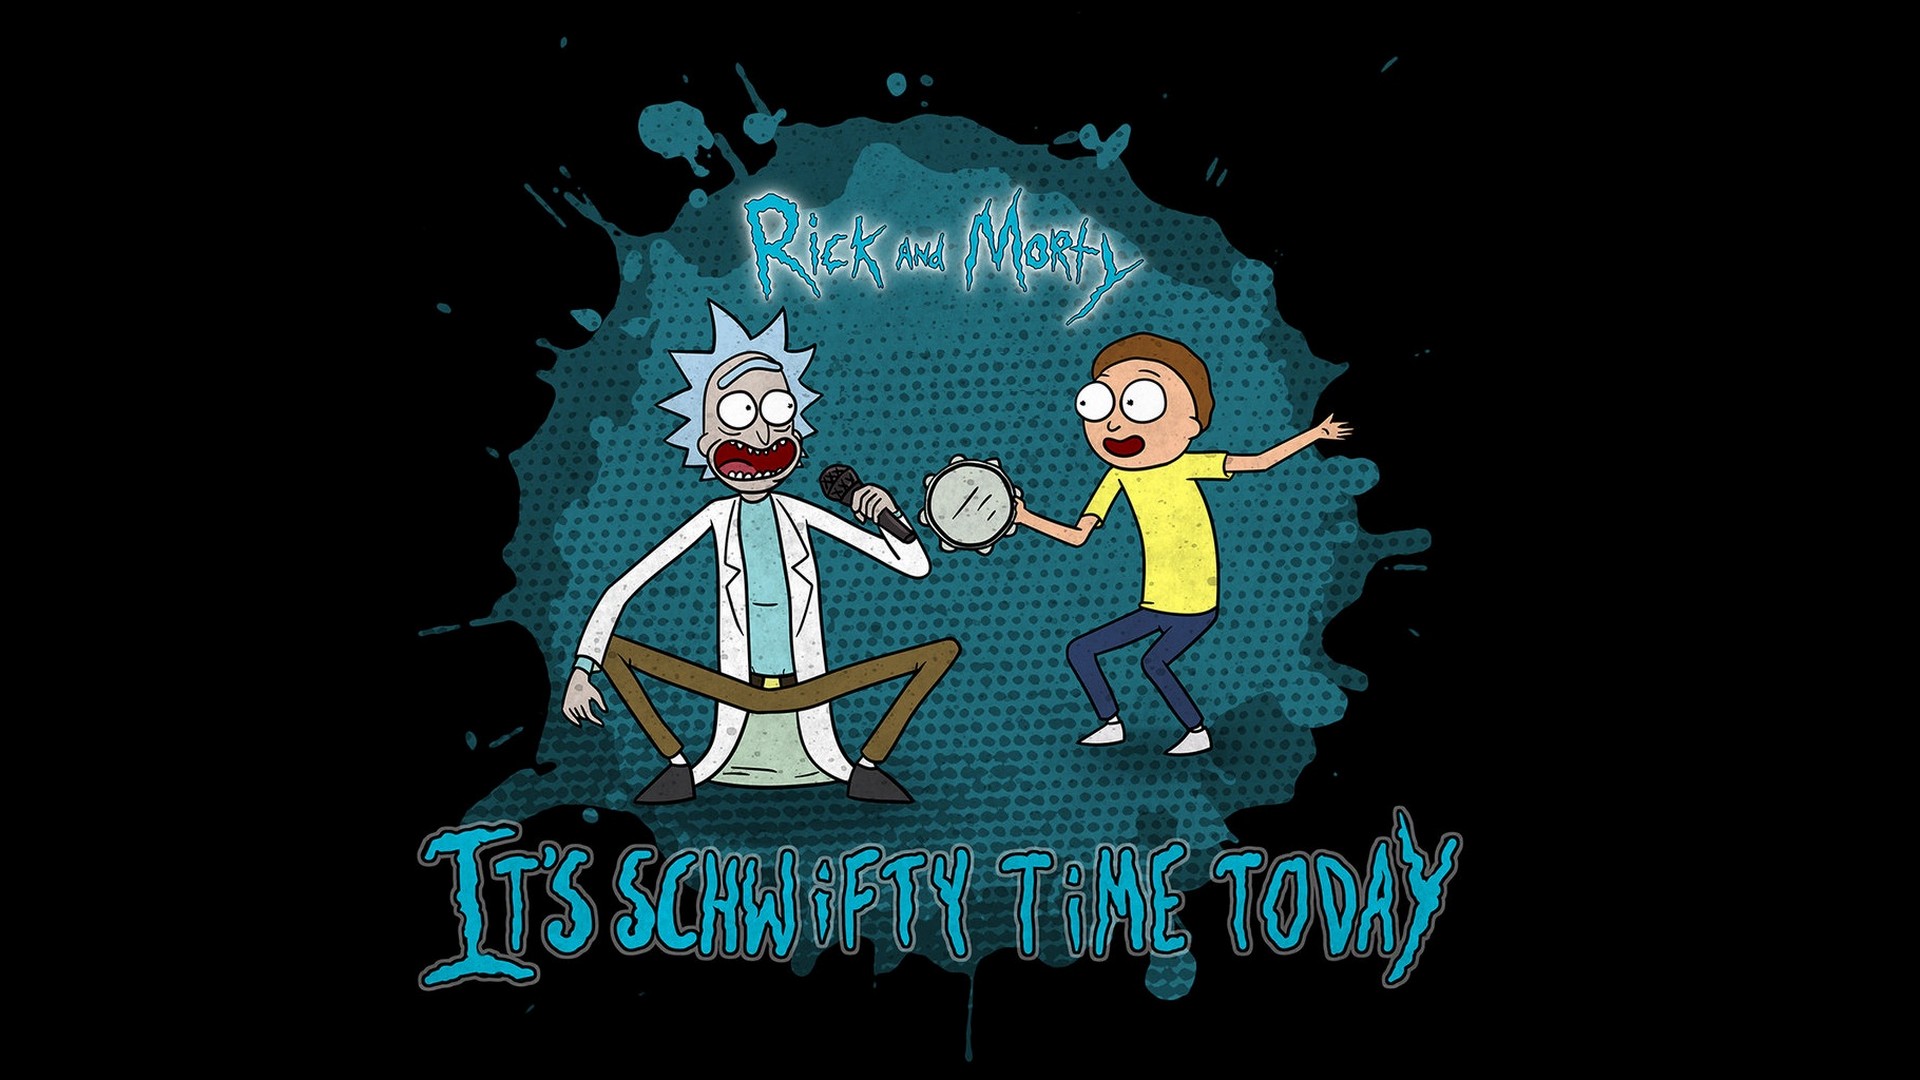 HD Rick and Morty Art Backgrounds with resolution 1920X1080 pixel. You can use this wallpaper as background for your desktop Computer Screensavers, Android or iPhone smartphones